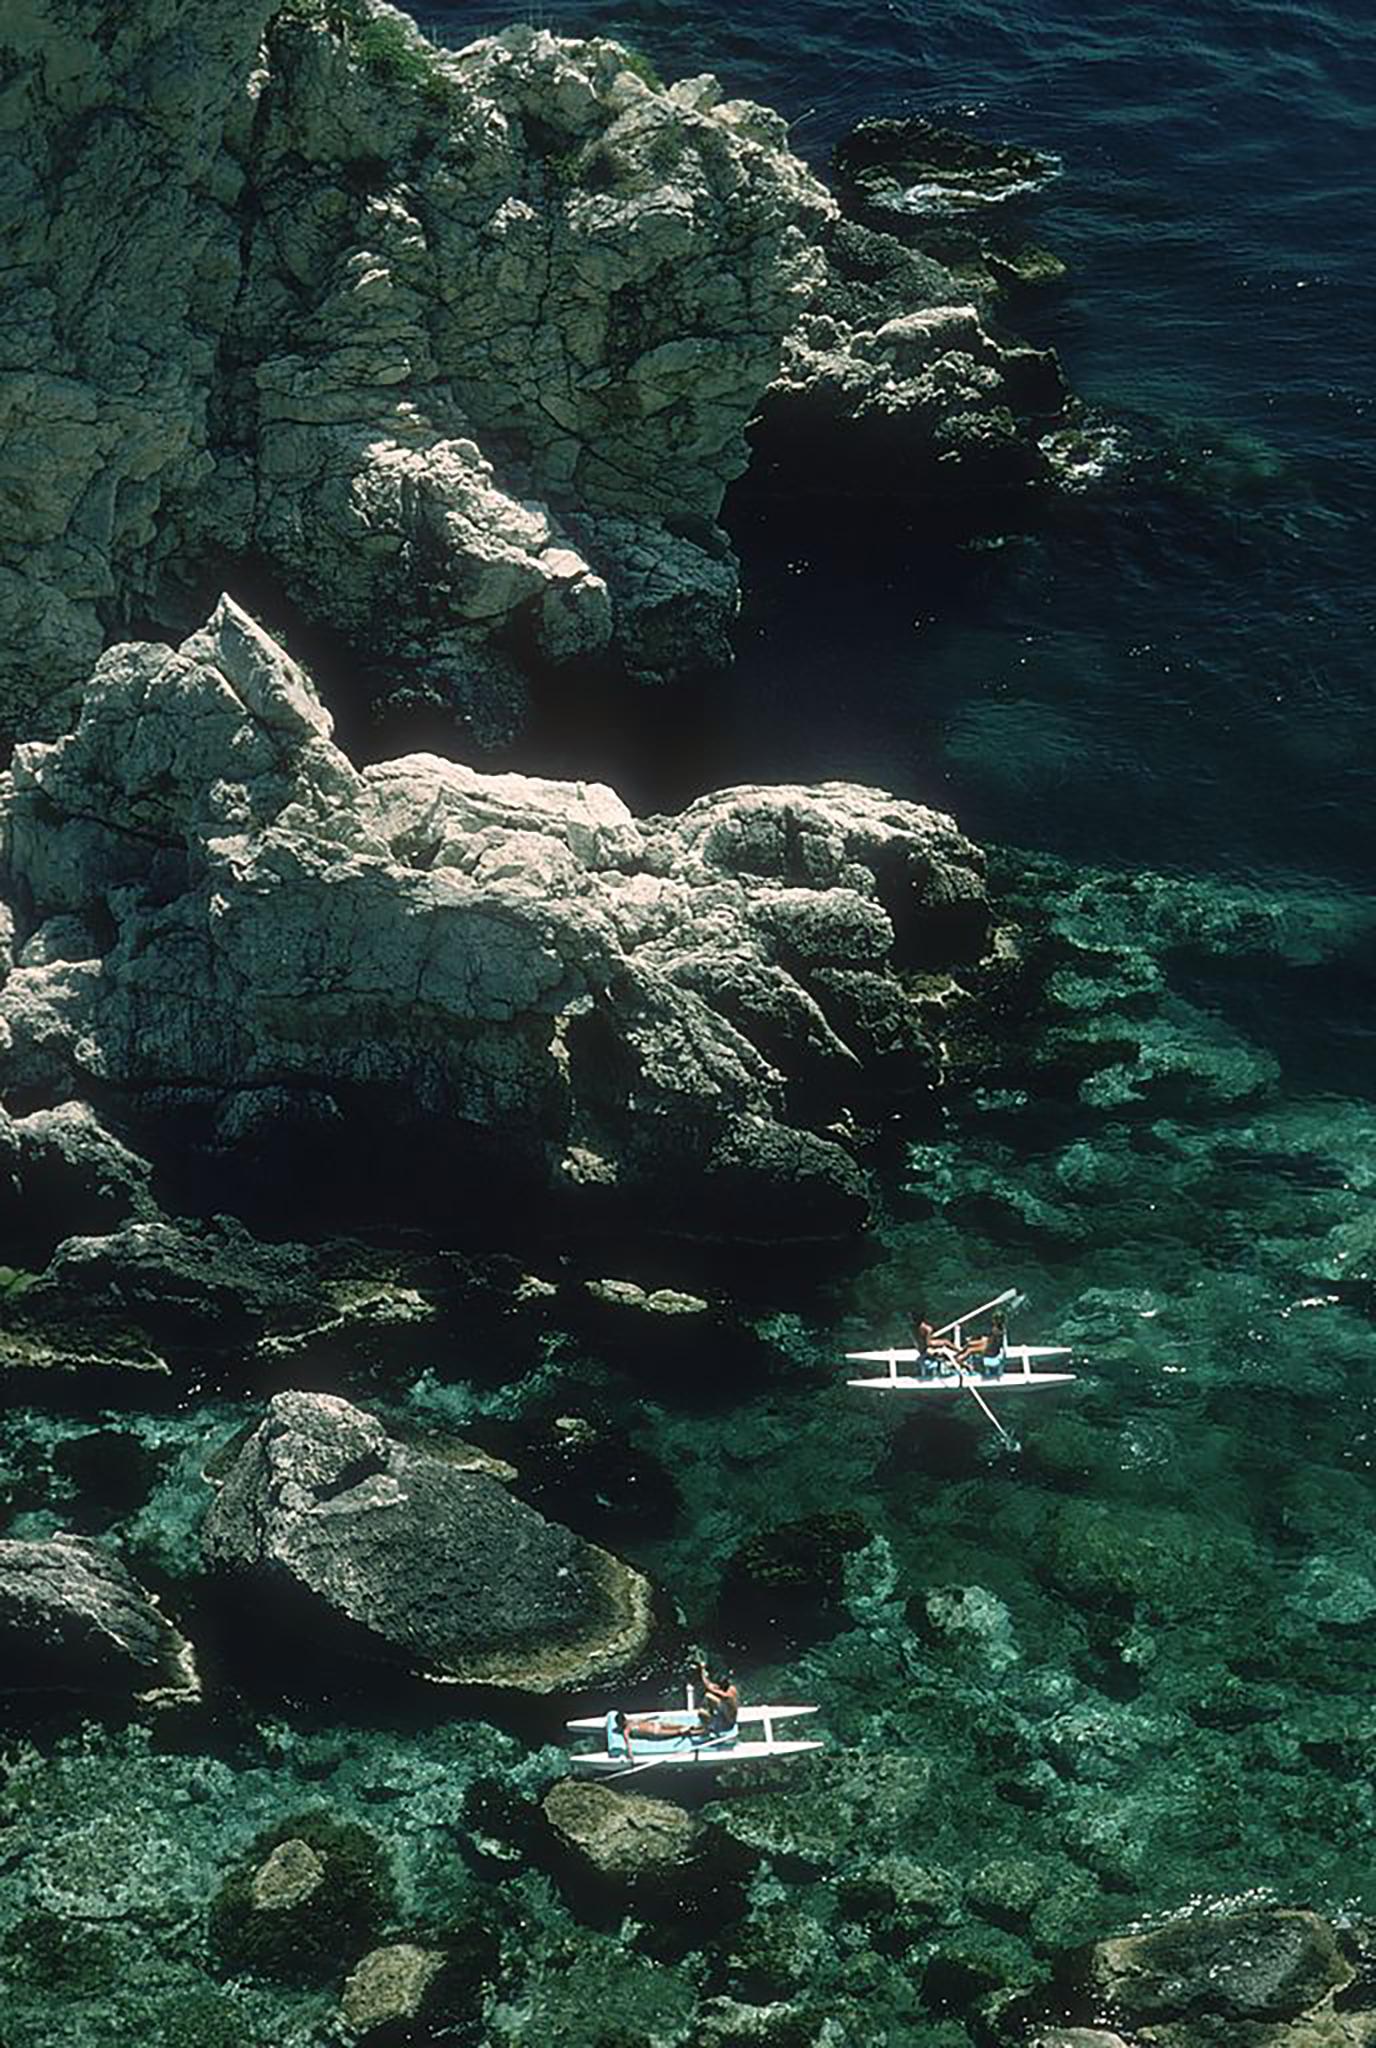 Slim Aarons Color Photograph - Rowing Off Sicily, Estate Edition (Taormina, Italy: rocky turquoise seascape)